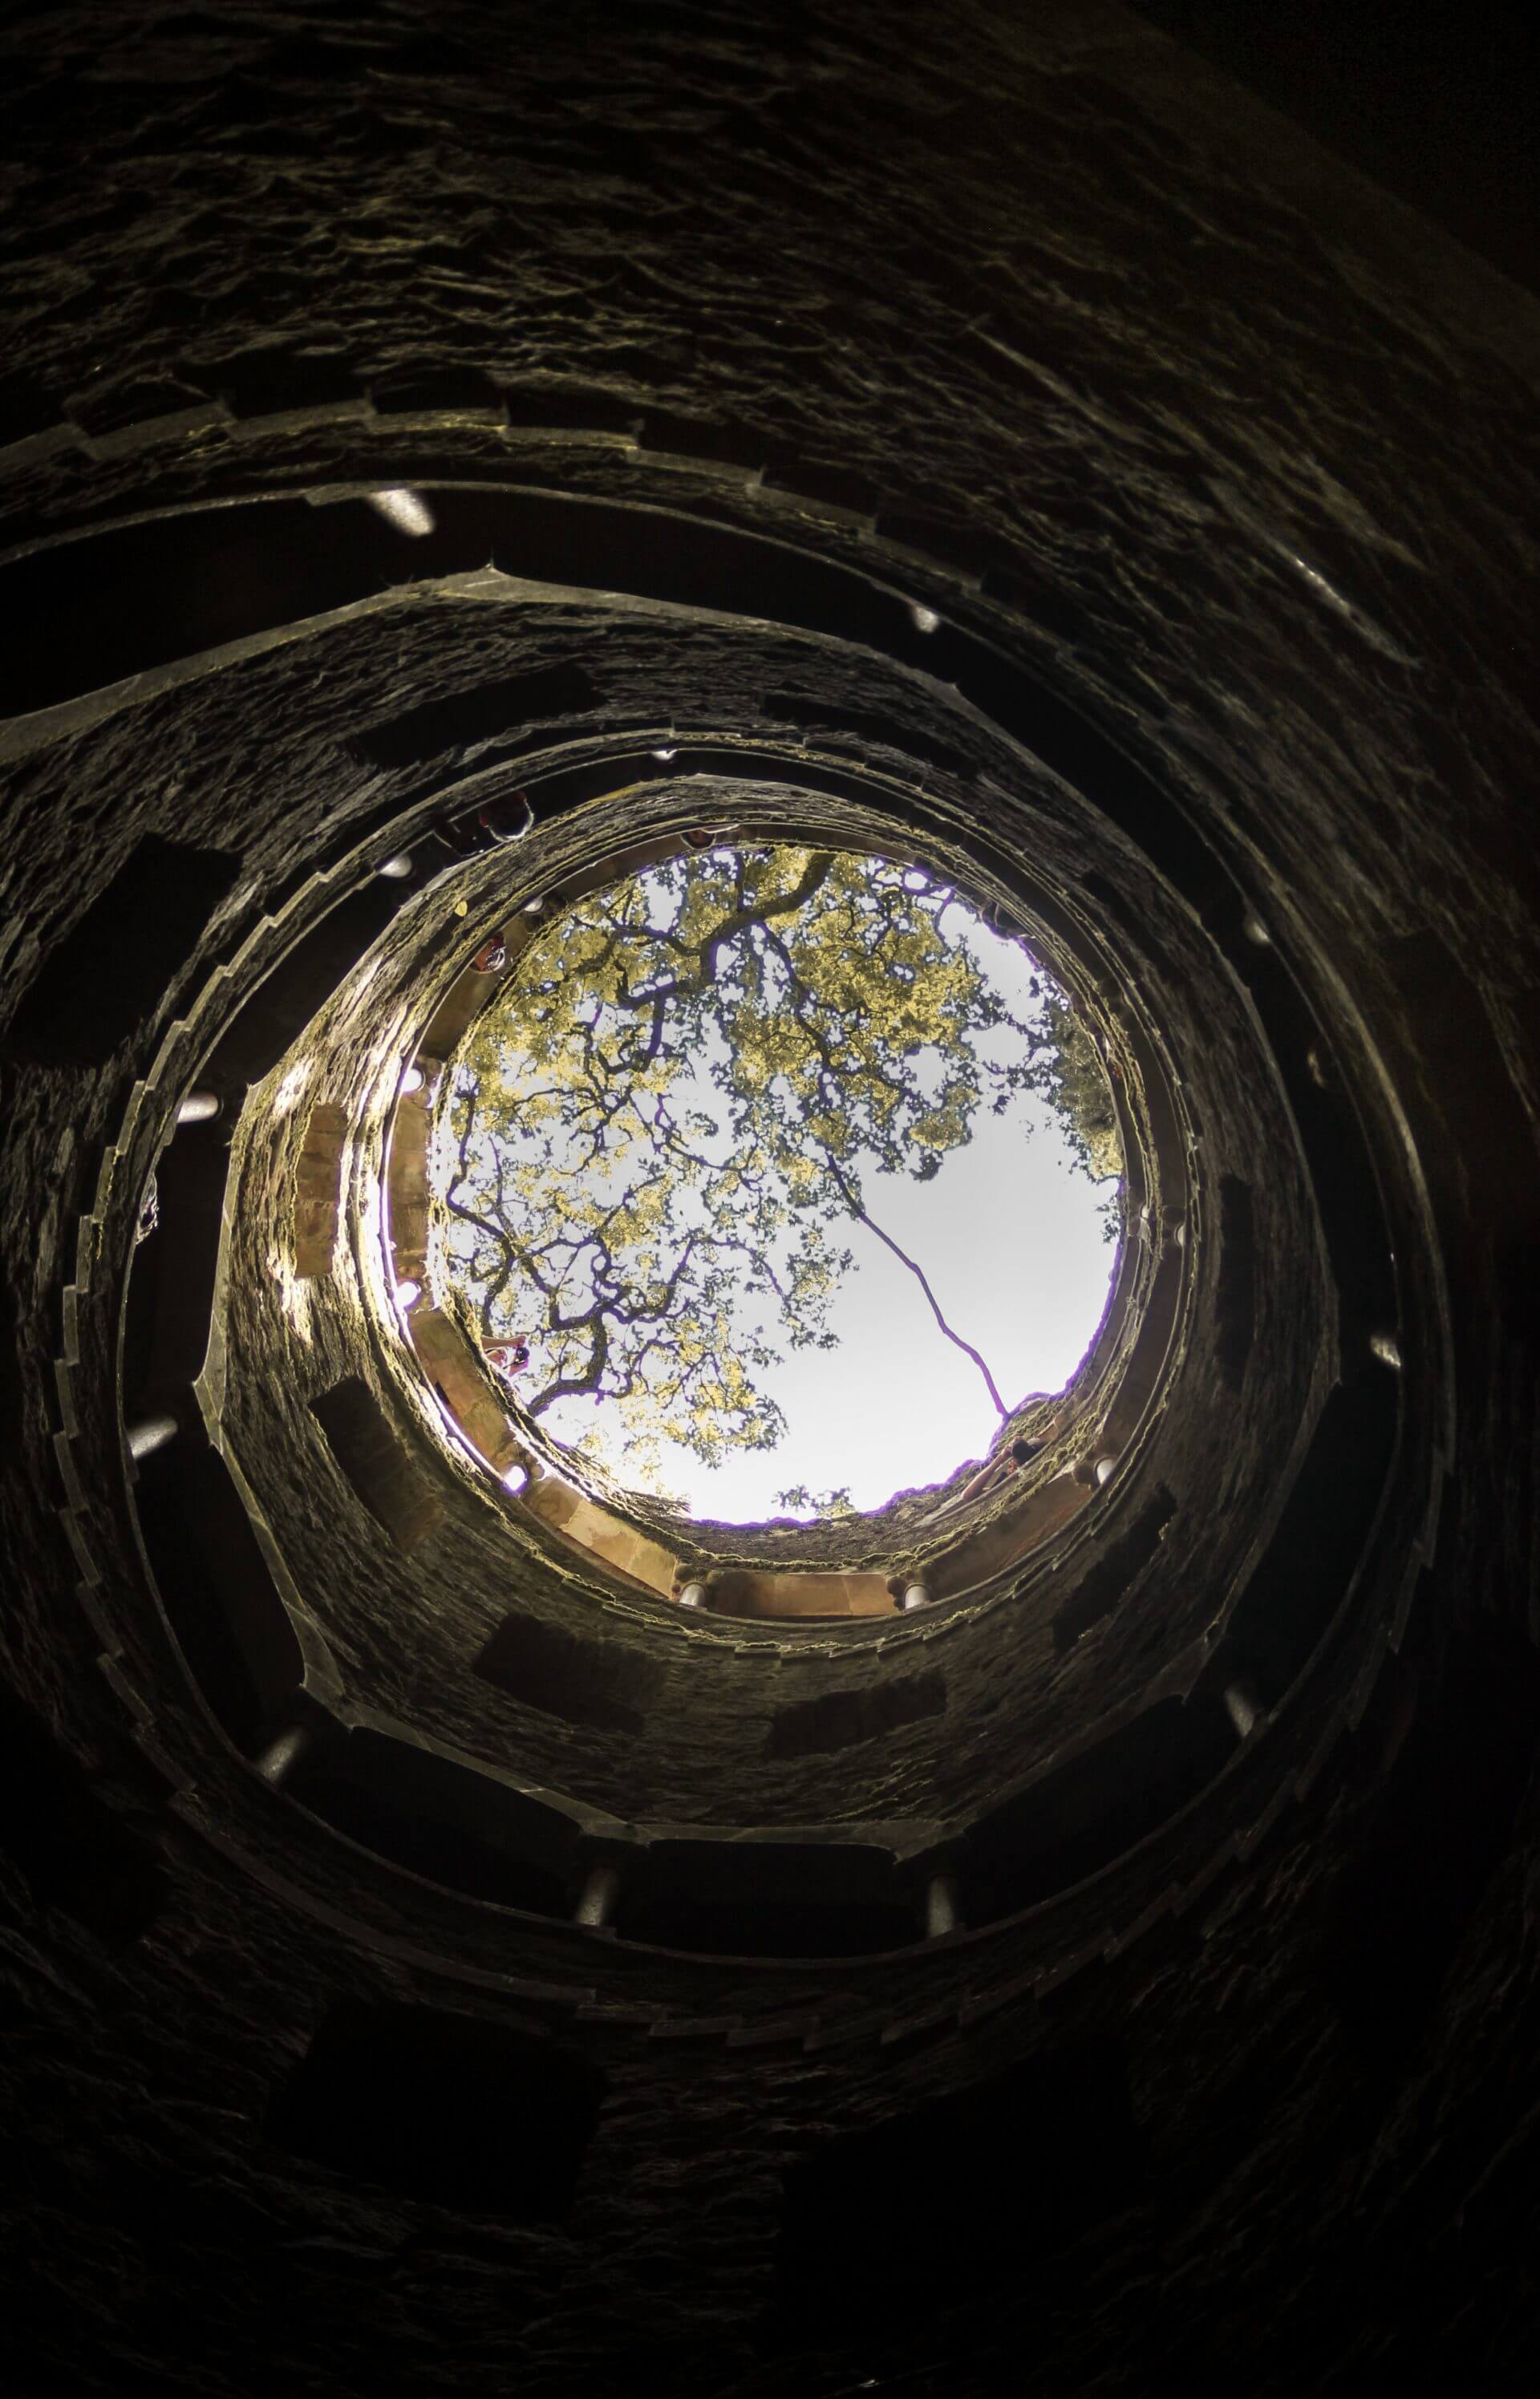 A view from the bottom of a well looking to the sky.